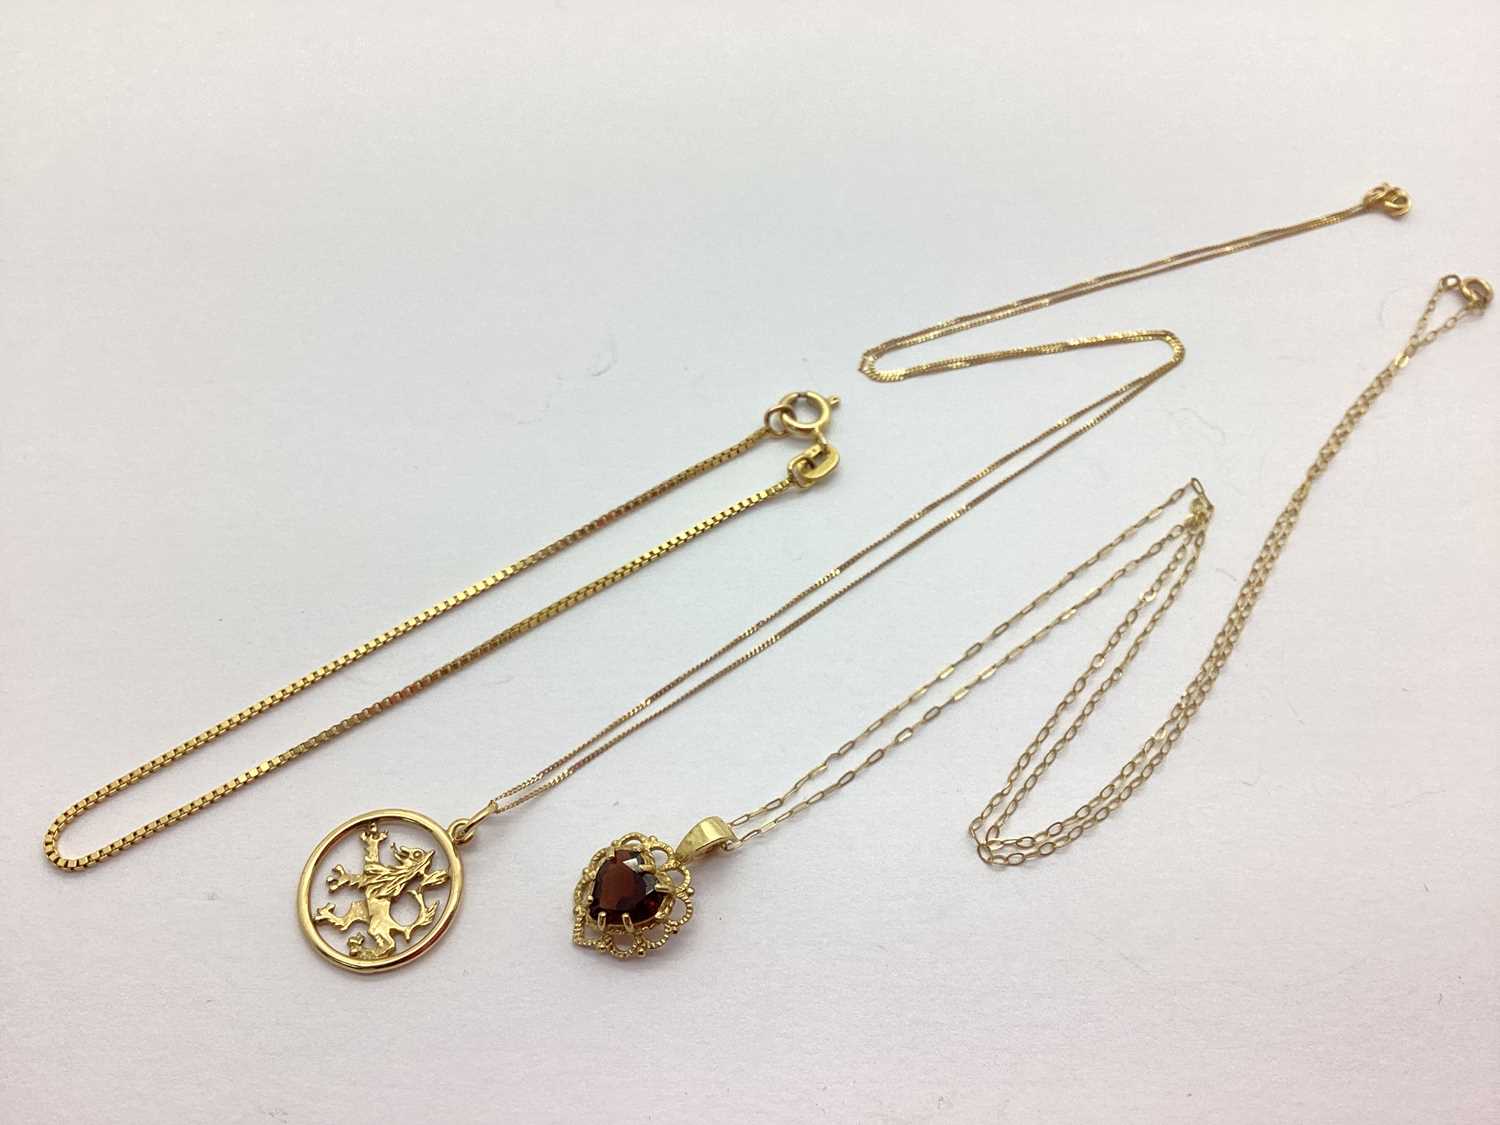 A Hallmarked 9ct Dainty Box Link Bracelet, together with a dainty pendant necklace, of open circle